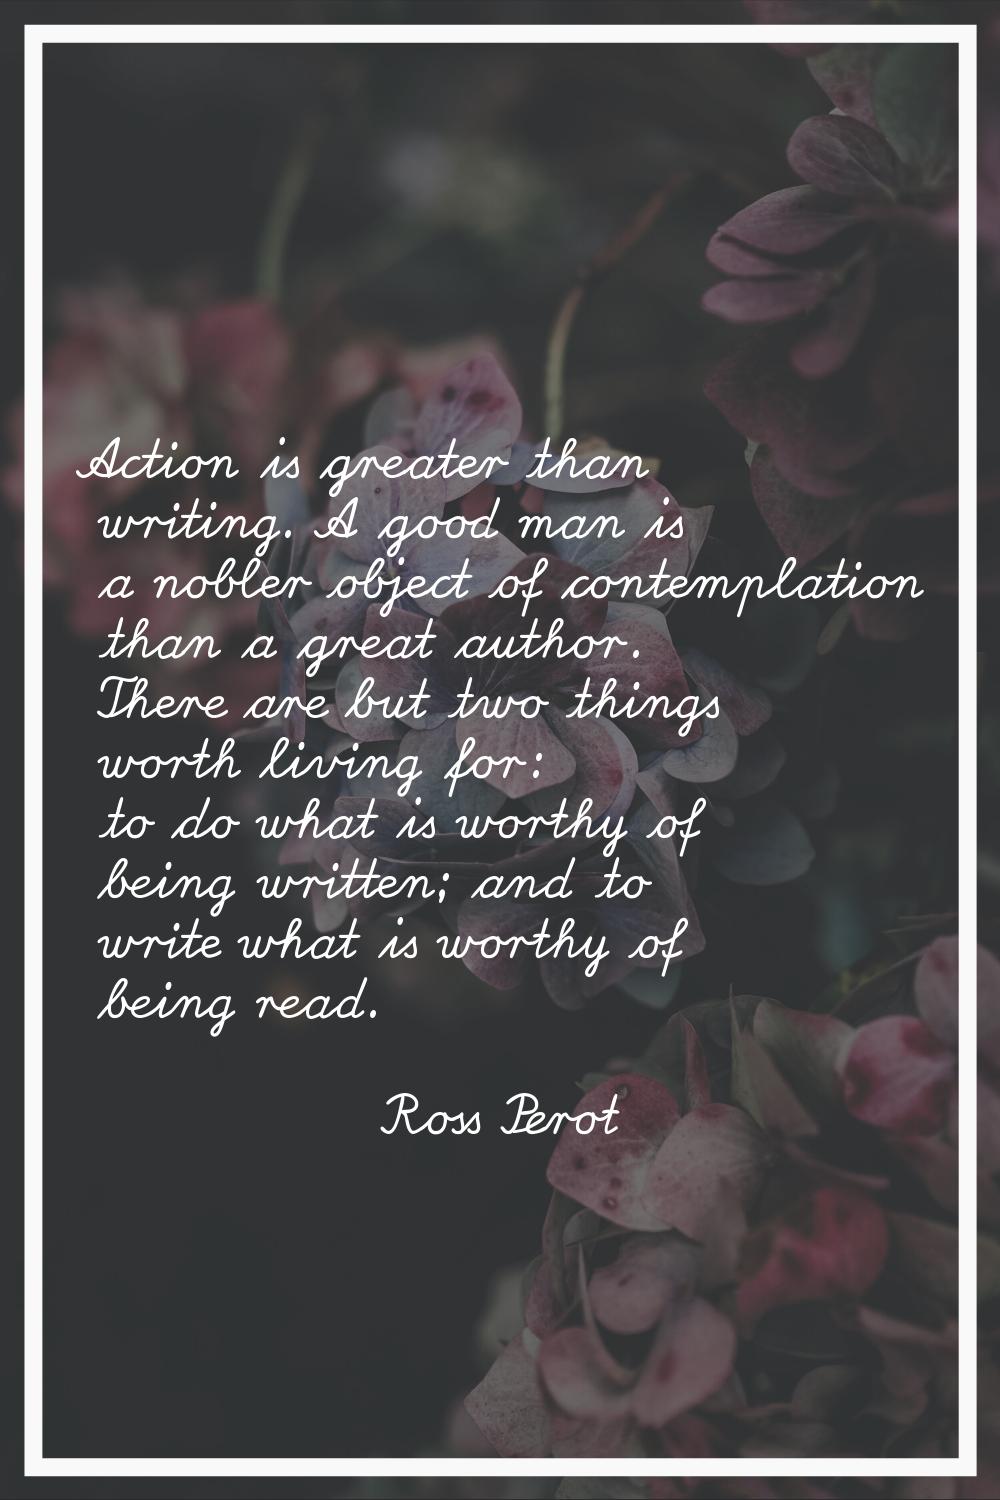 Action is greater than writing. A good man is a nobler object of contemplation than a great author.